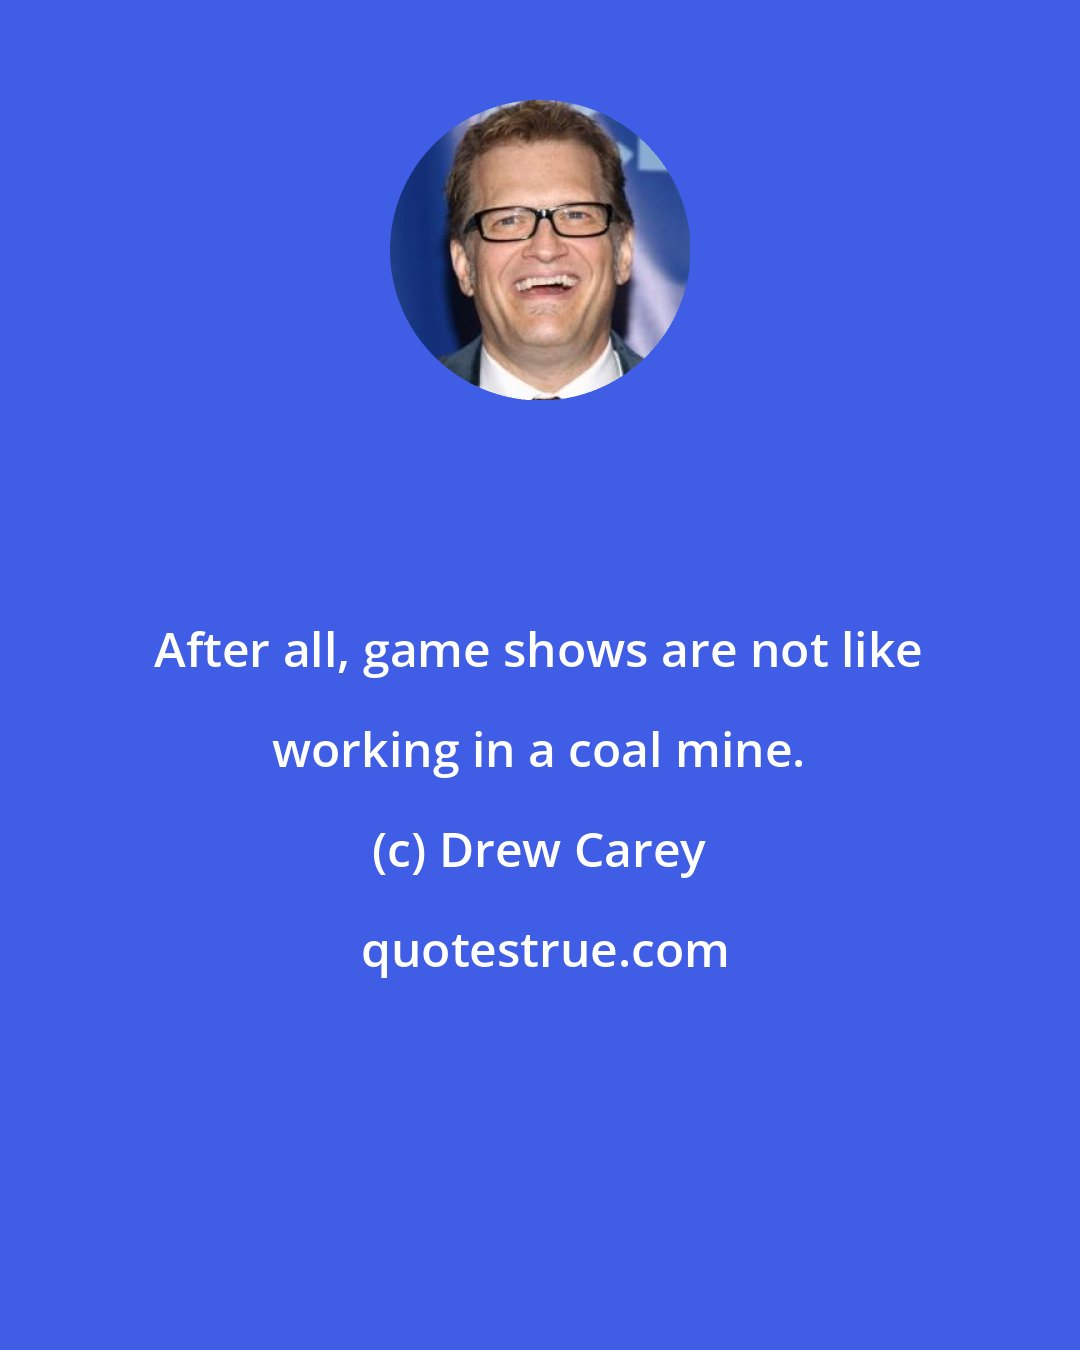 Drew Carey: After all, game shows are not like working in a coal mine.